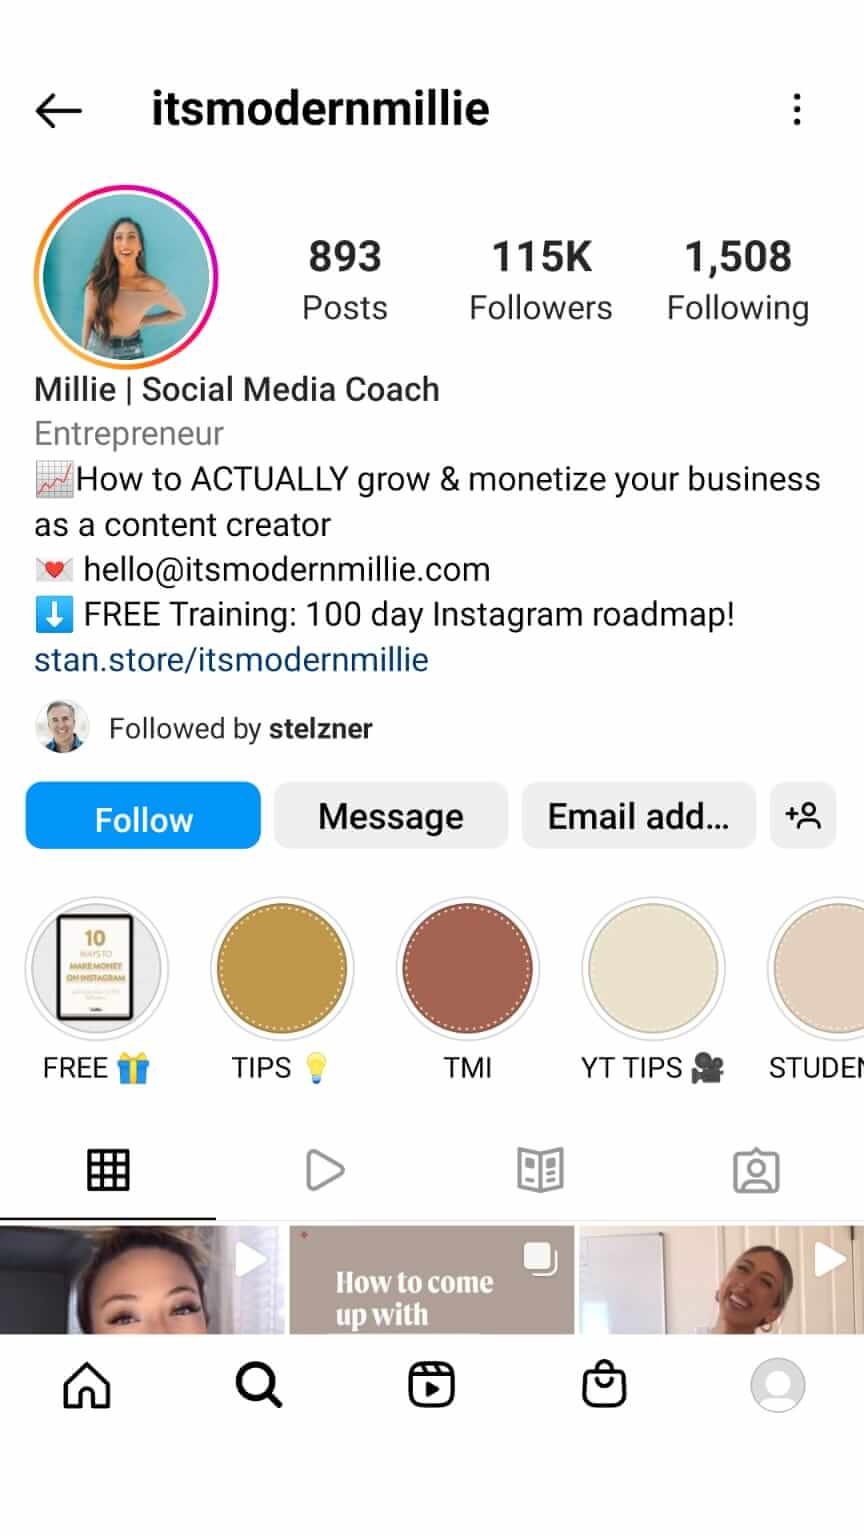 how-to-audit-your-instagram-profile-page-bio-link-photo-account-type-display-name-itsmodernmillie-example-5